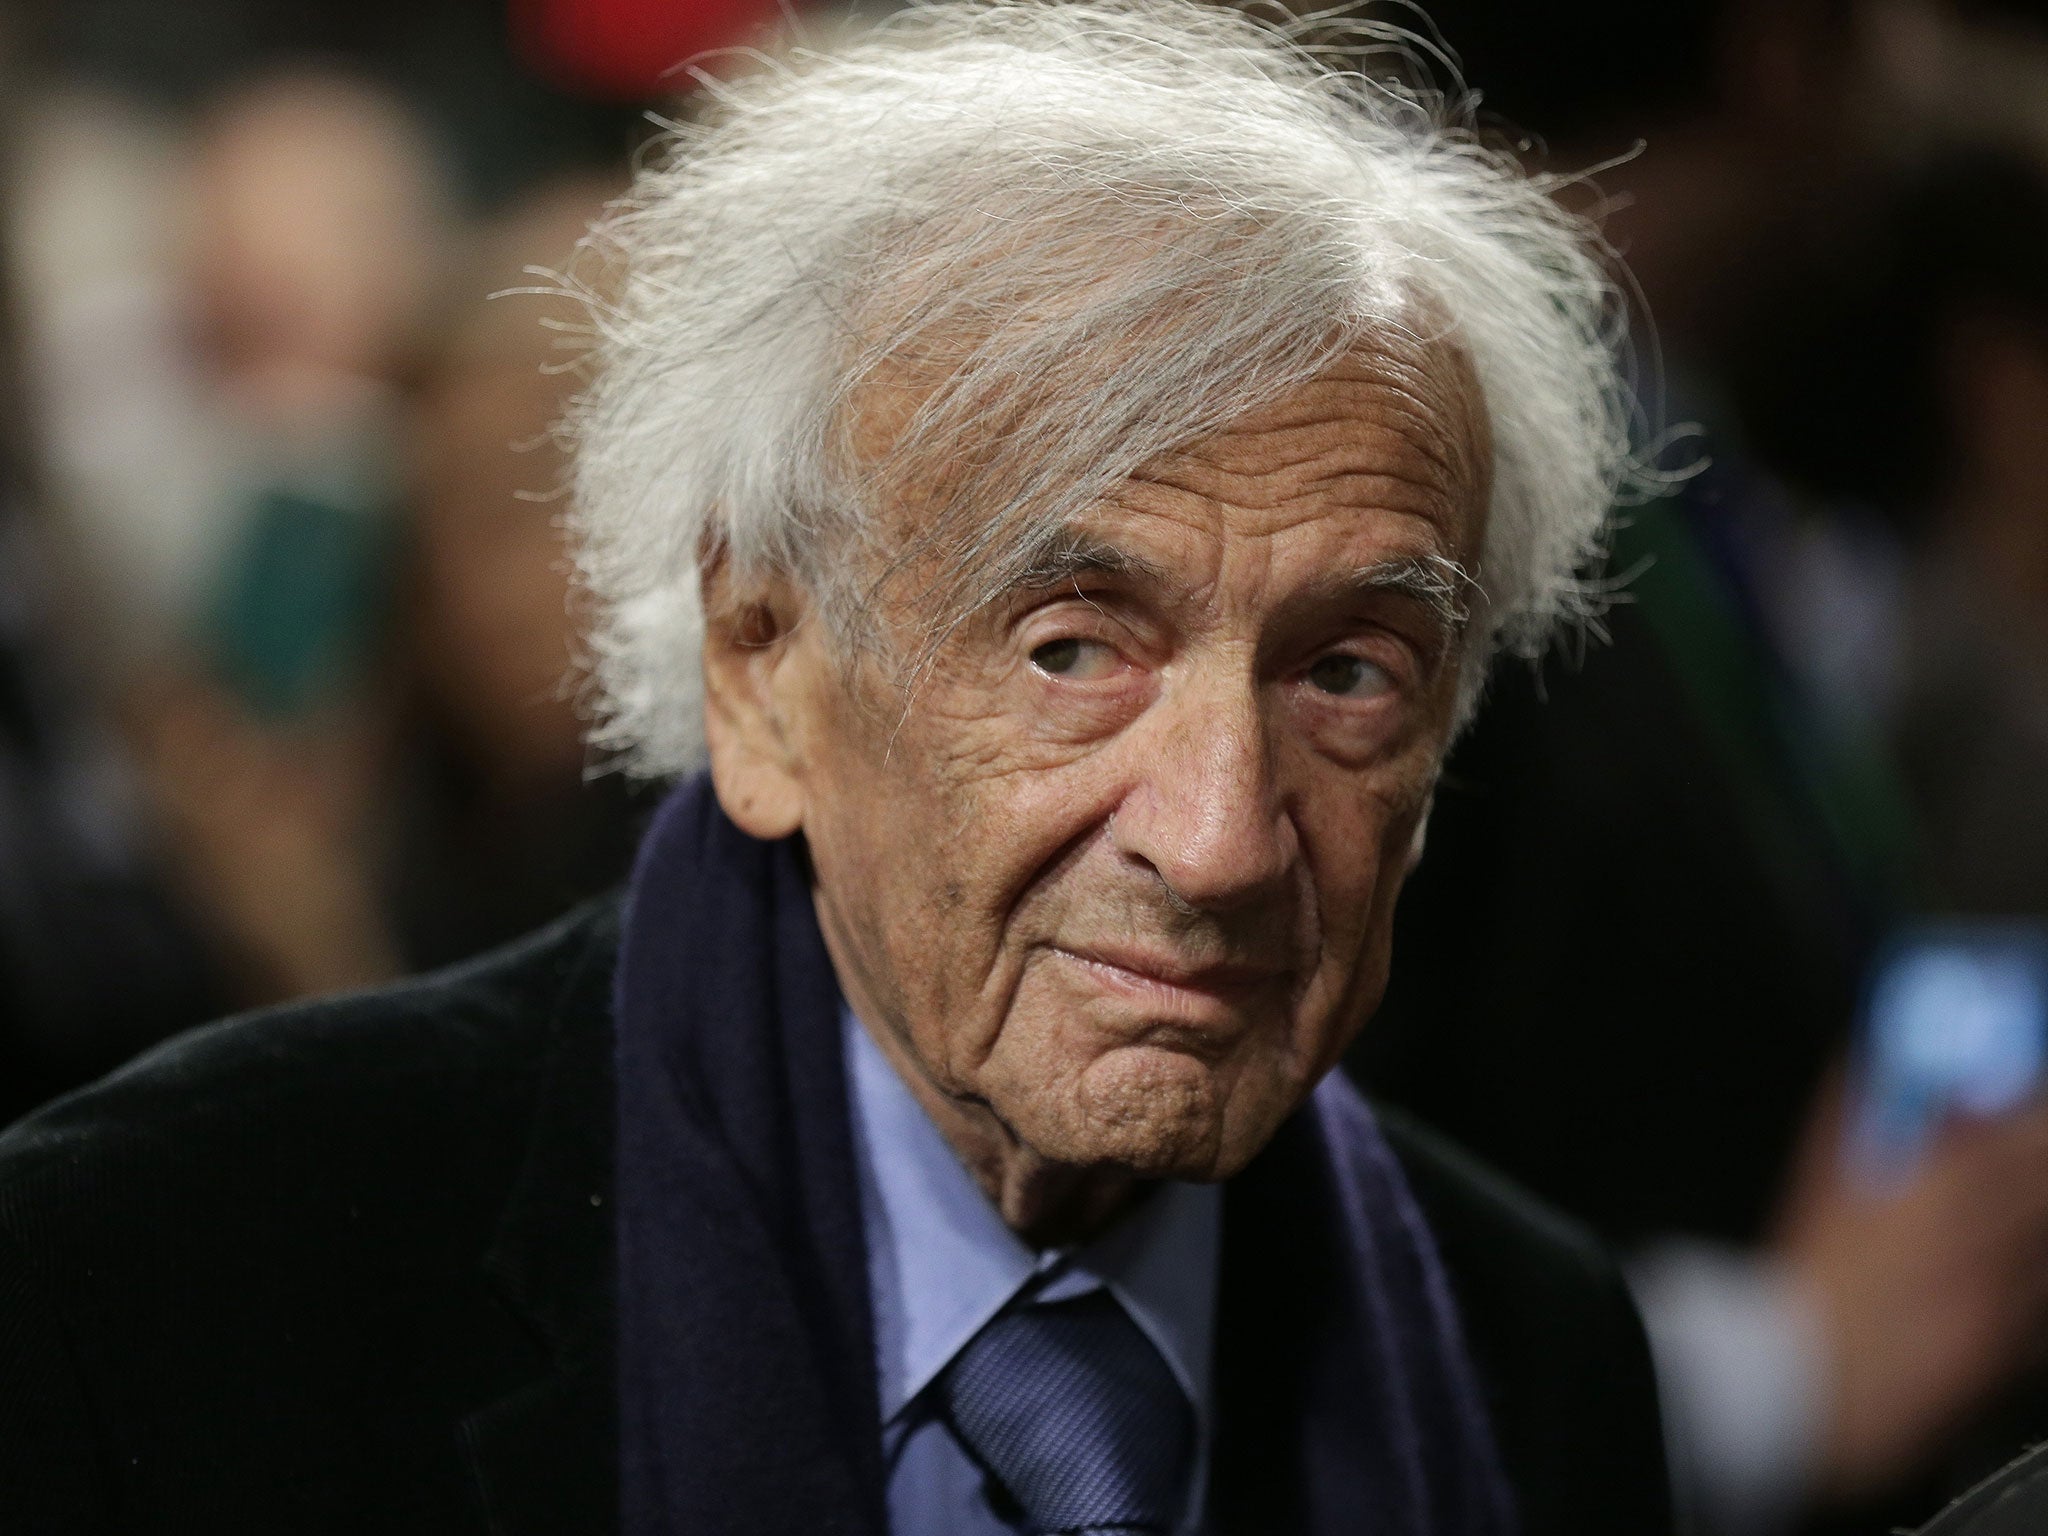 Wiesel said that he hoped not to live long enough to be the last survivor because the burden would be too great